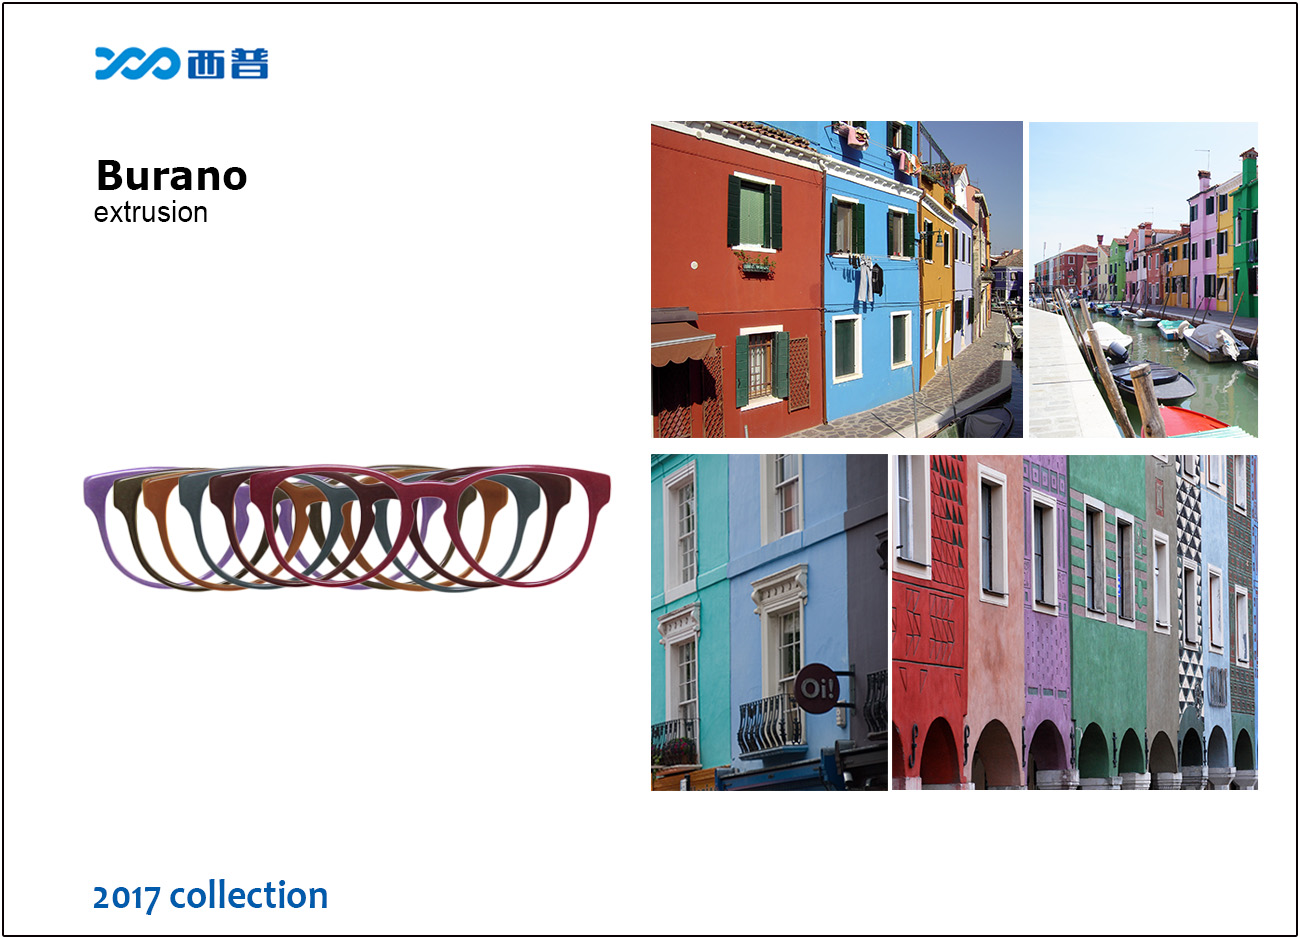 2017 collection of Burano